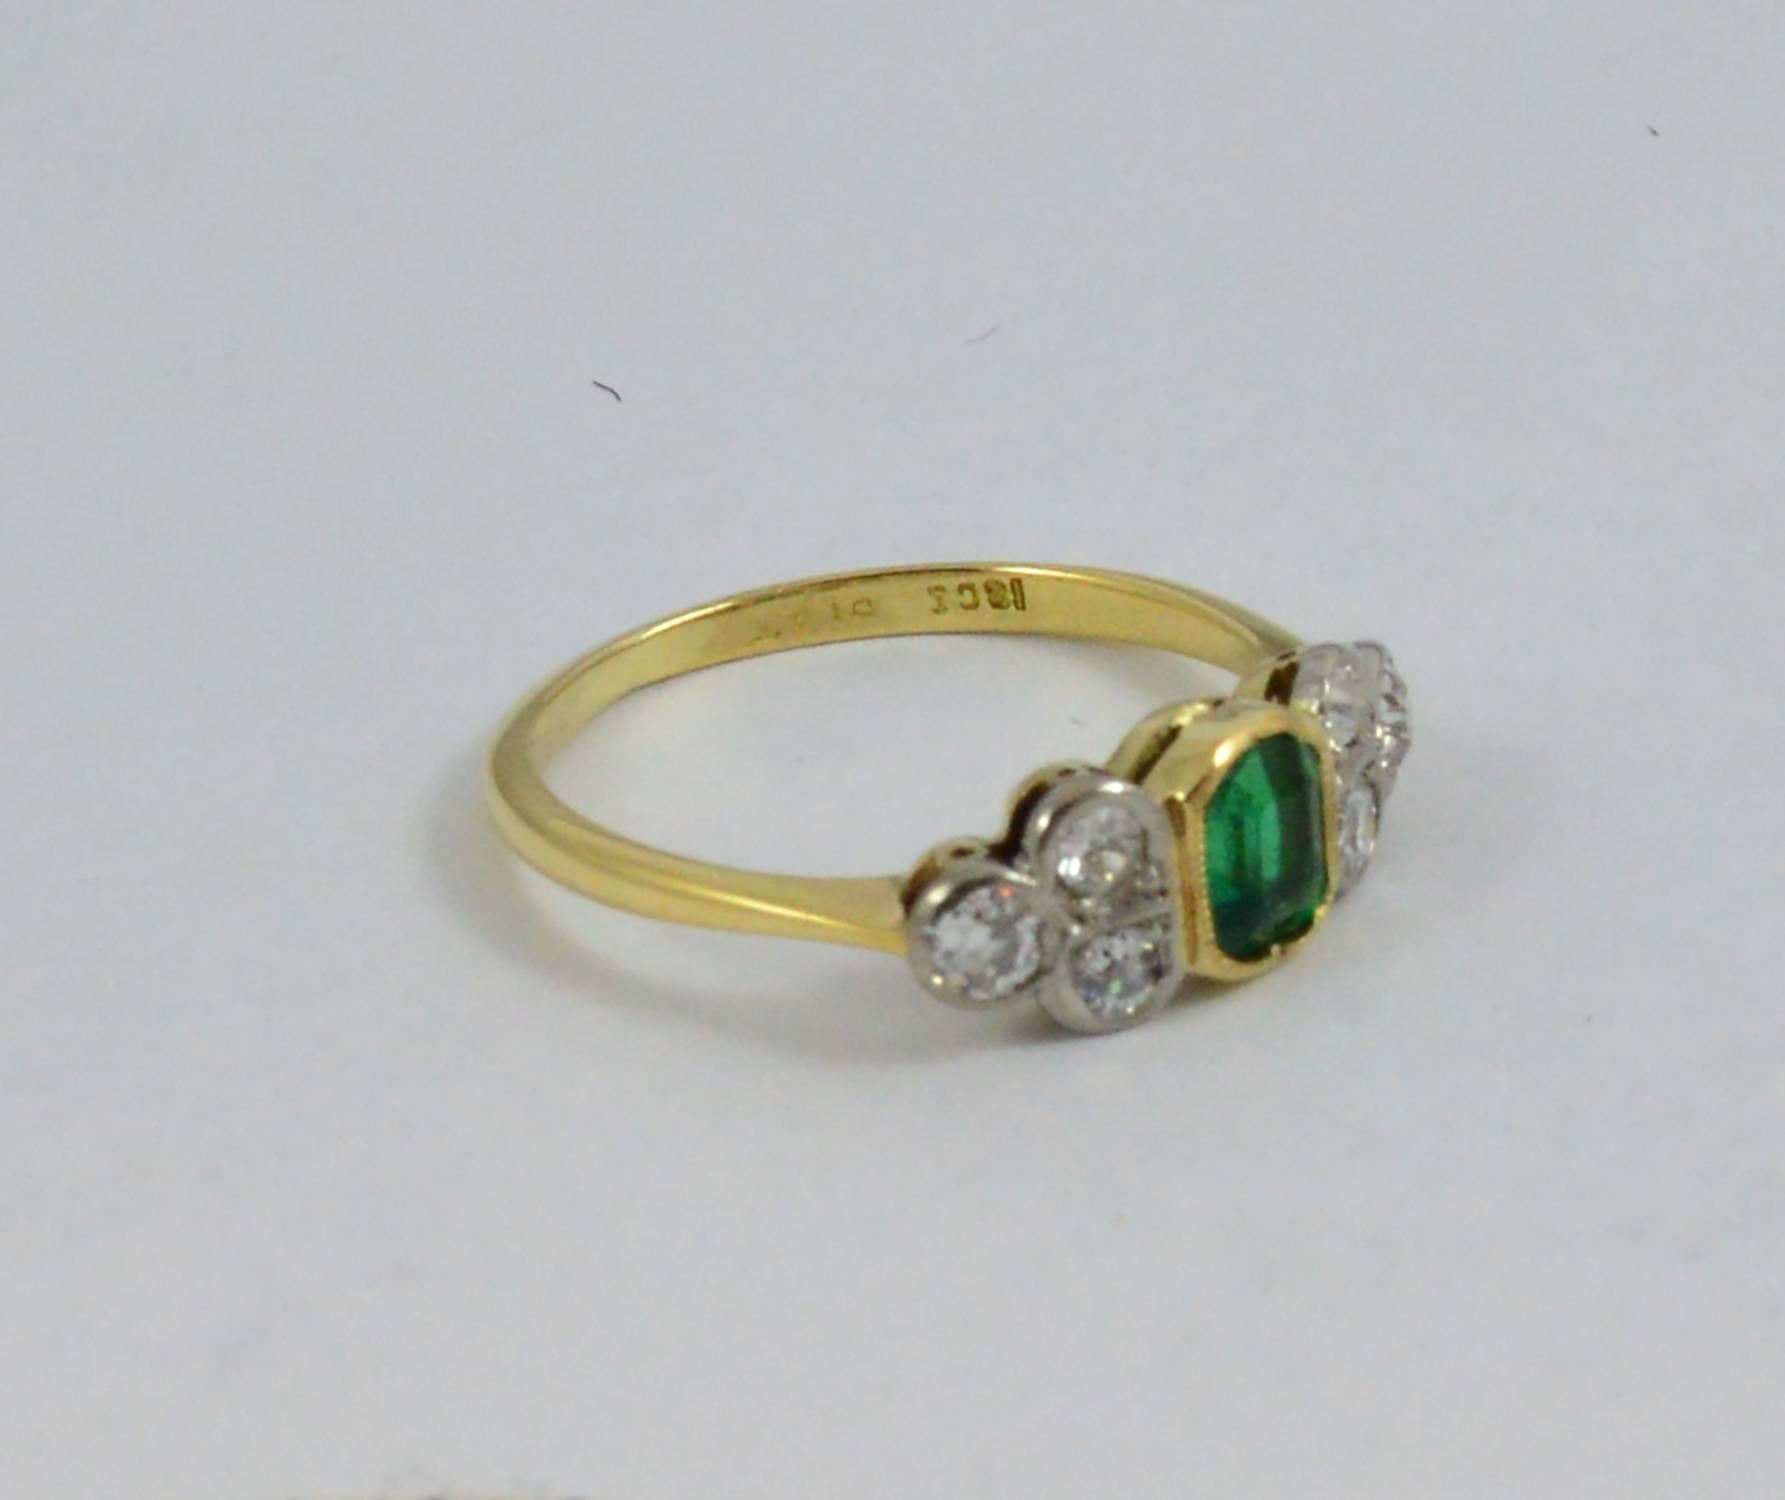 A charming bright vintage ring holding an intense rich green .60 ct. rectangular step cut emerald embellished by six old European cut diamonds (.44ct). The ring is custom made in platinum and 18kt yellow gold with detailed mill grain workmanship. It